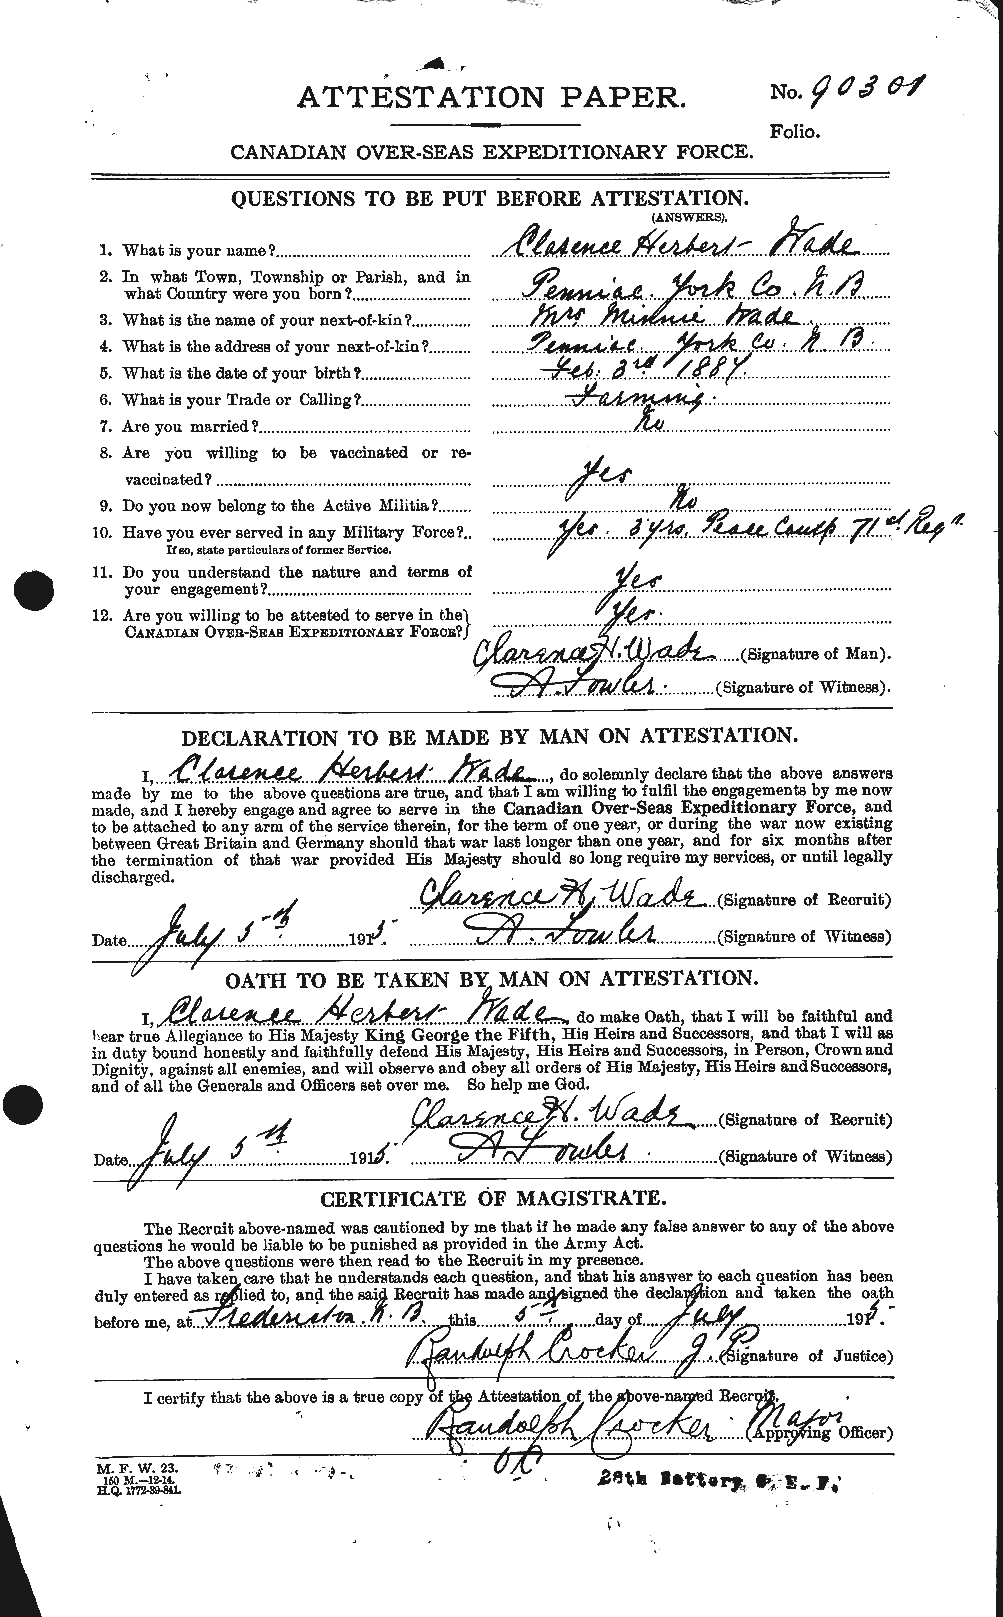 Personnel Records of the First World War - CEF 651191a